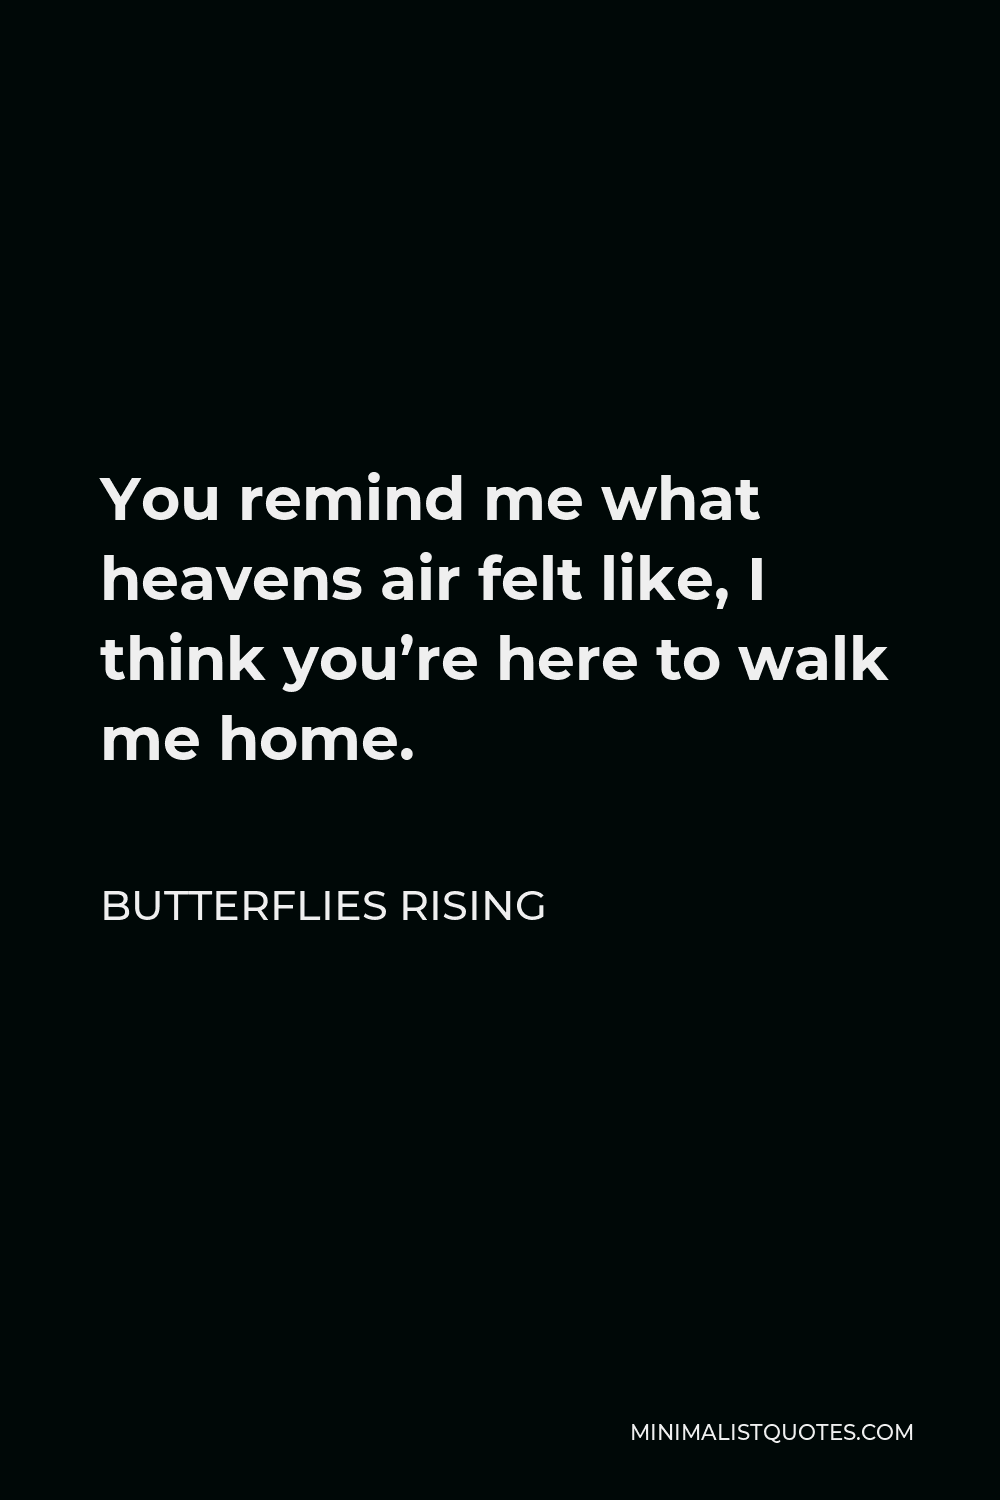 Butterflies Rising Quote - You remind me what heavens air felt like, I think you’re here to walk me home.